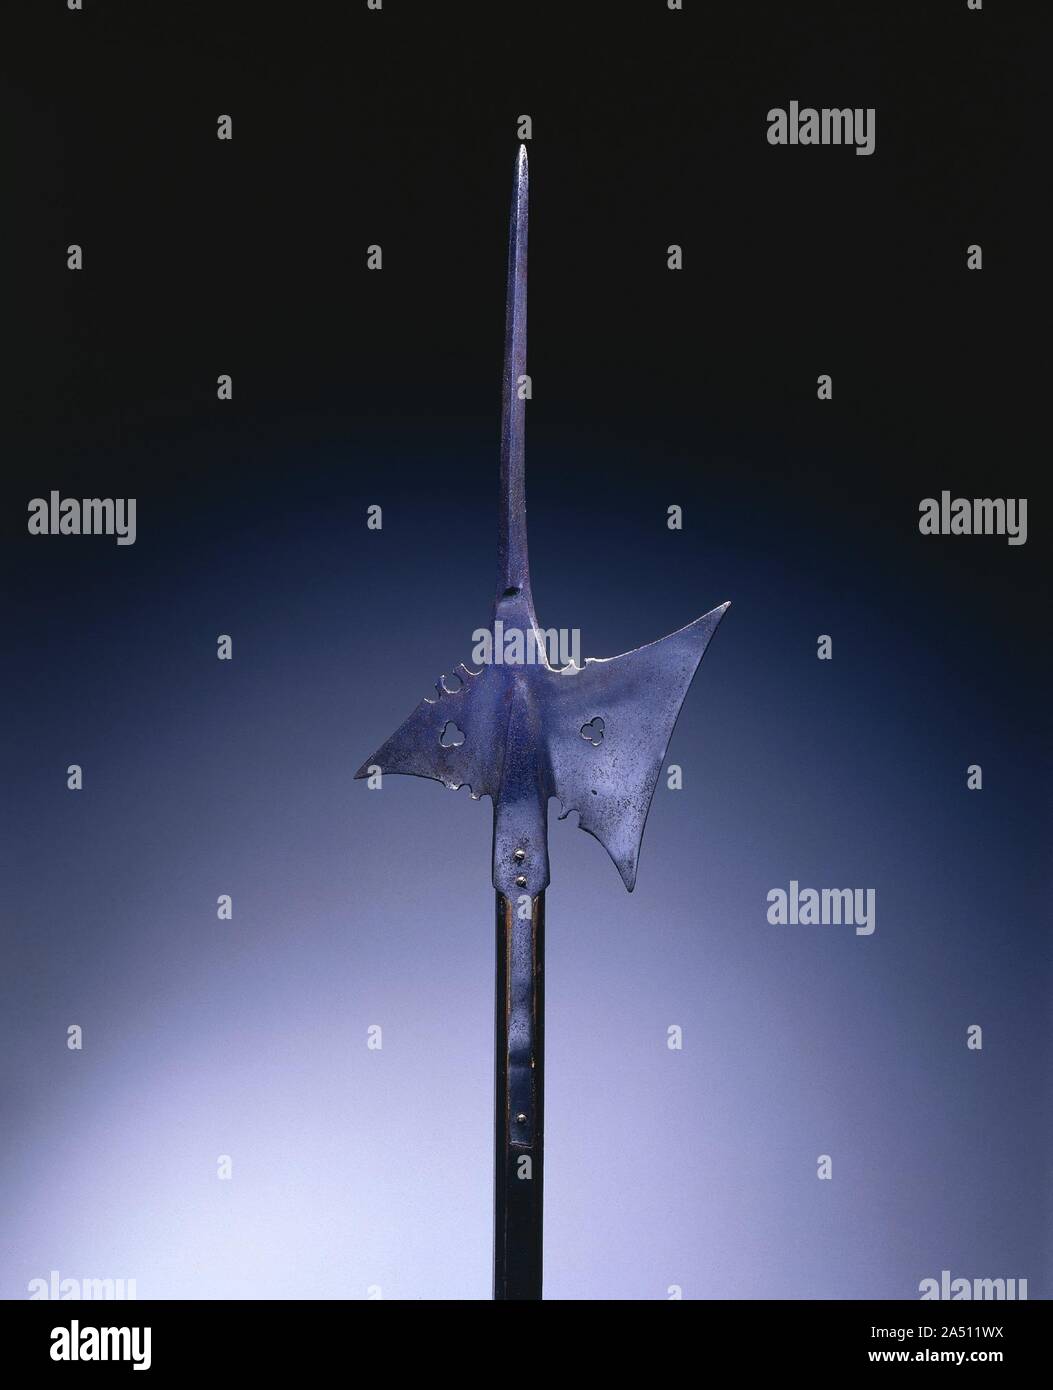 Halberd, c. 1550. The most effecient weapons used by the infantry (foot soldiers) during the 15th and 16th centuries were pole arms (or staff weapons). The halberd, like the examples shown here, was a weapon of great versatility. The word  halberd  comes from the German words Halm (a staff) and Barte (an axe). The halberd is, in fact, an axe mounted on a long pole with a very specialized shape and function: the axe blade was used for hacking, the spike for thrusting, and the beak either for piercing plate armor or for pulling a knight from his saddle. Used by shock troops, the halberd was the Stock Photo